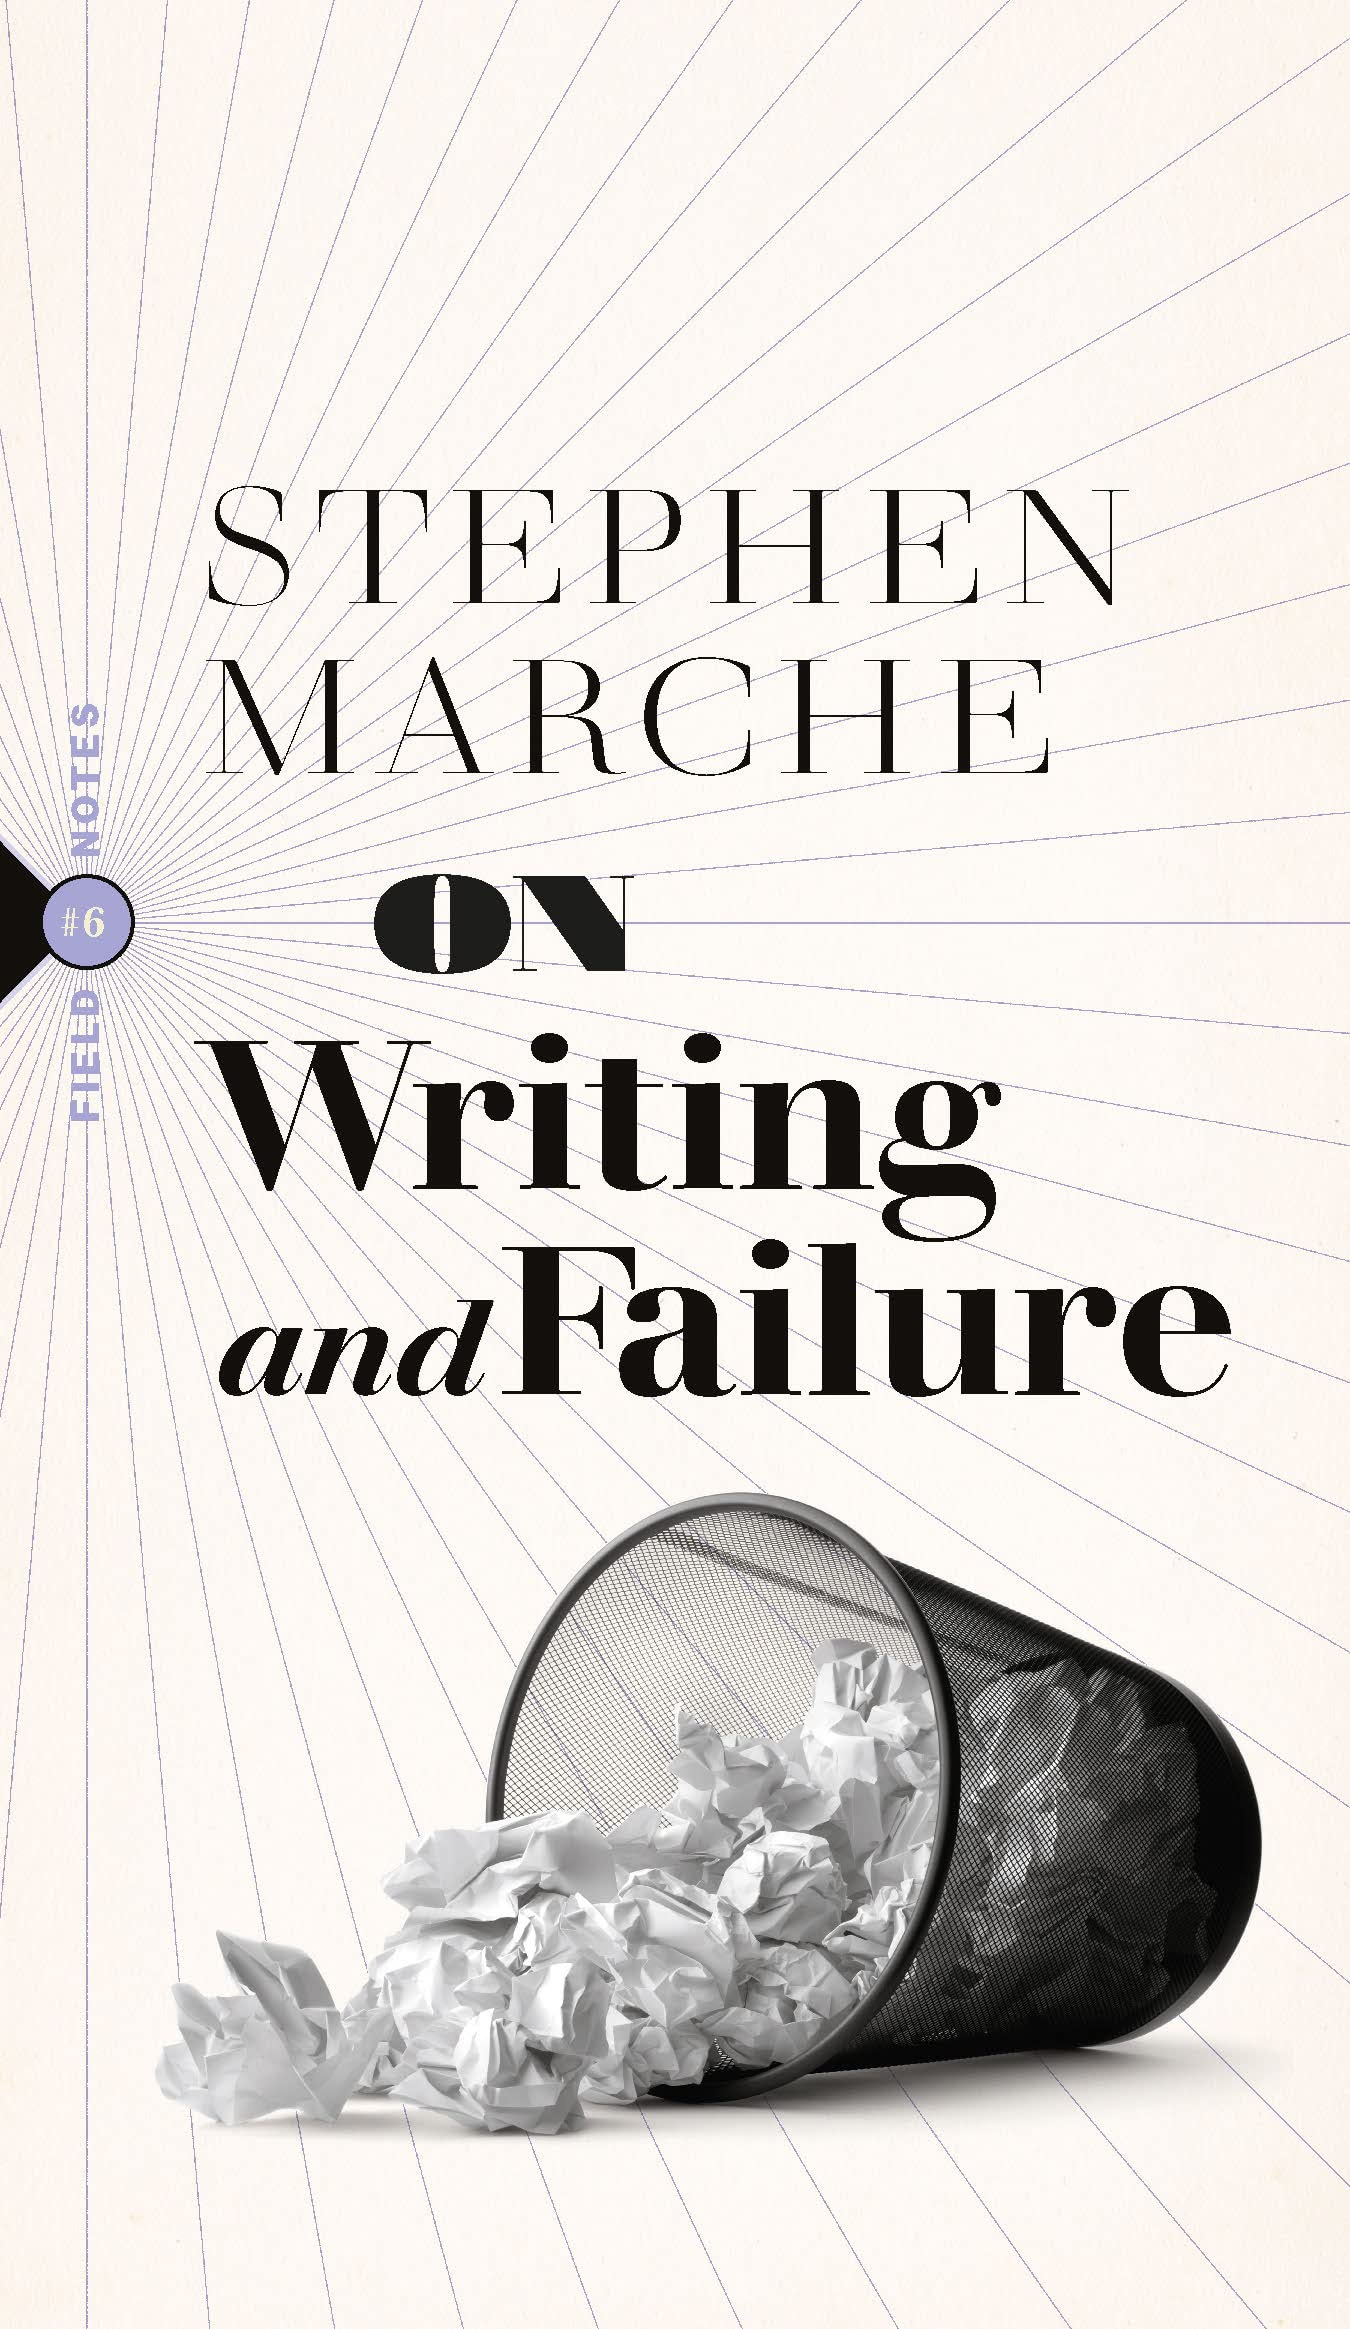 On Writing and Failure: Or, On the Peculiar Perseverance Required to Endure  the Life of a Writer: Marche, Stephen: 9781771965163: Books - Amazon.ca